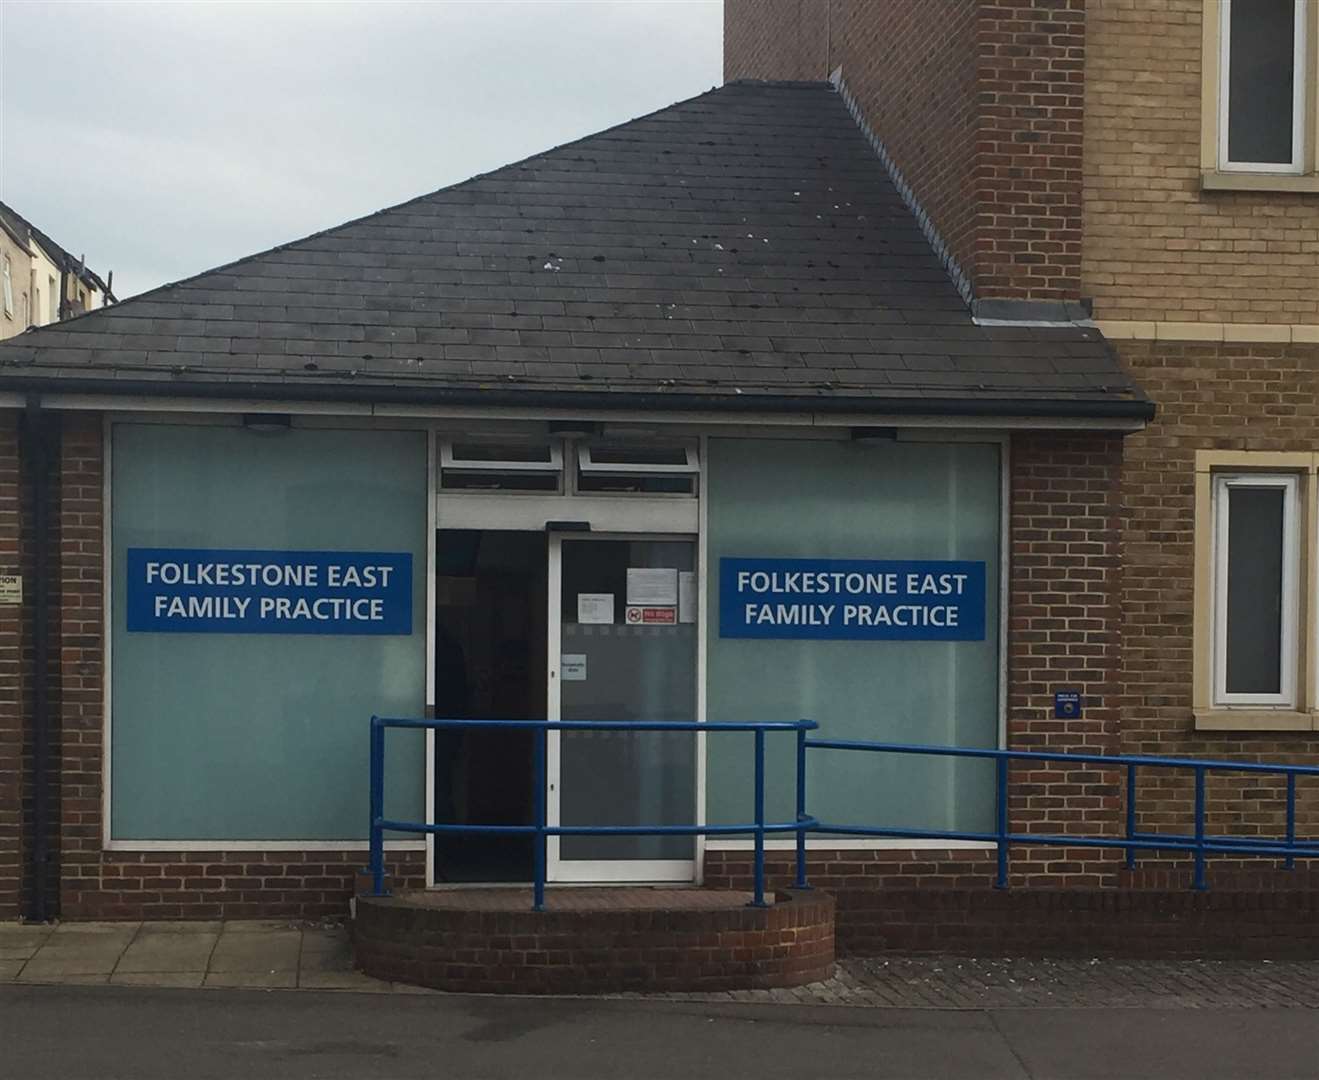 Folkestone East Family Practice closed in 2017